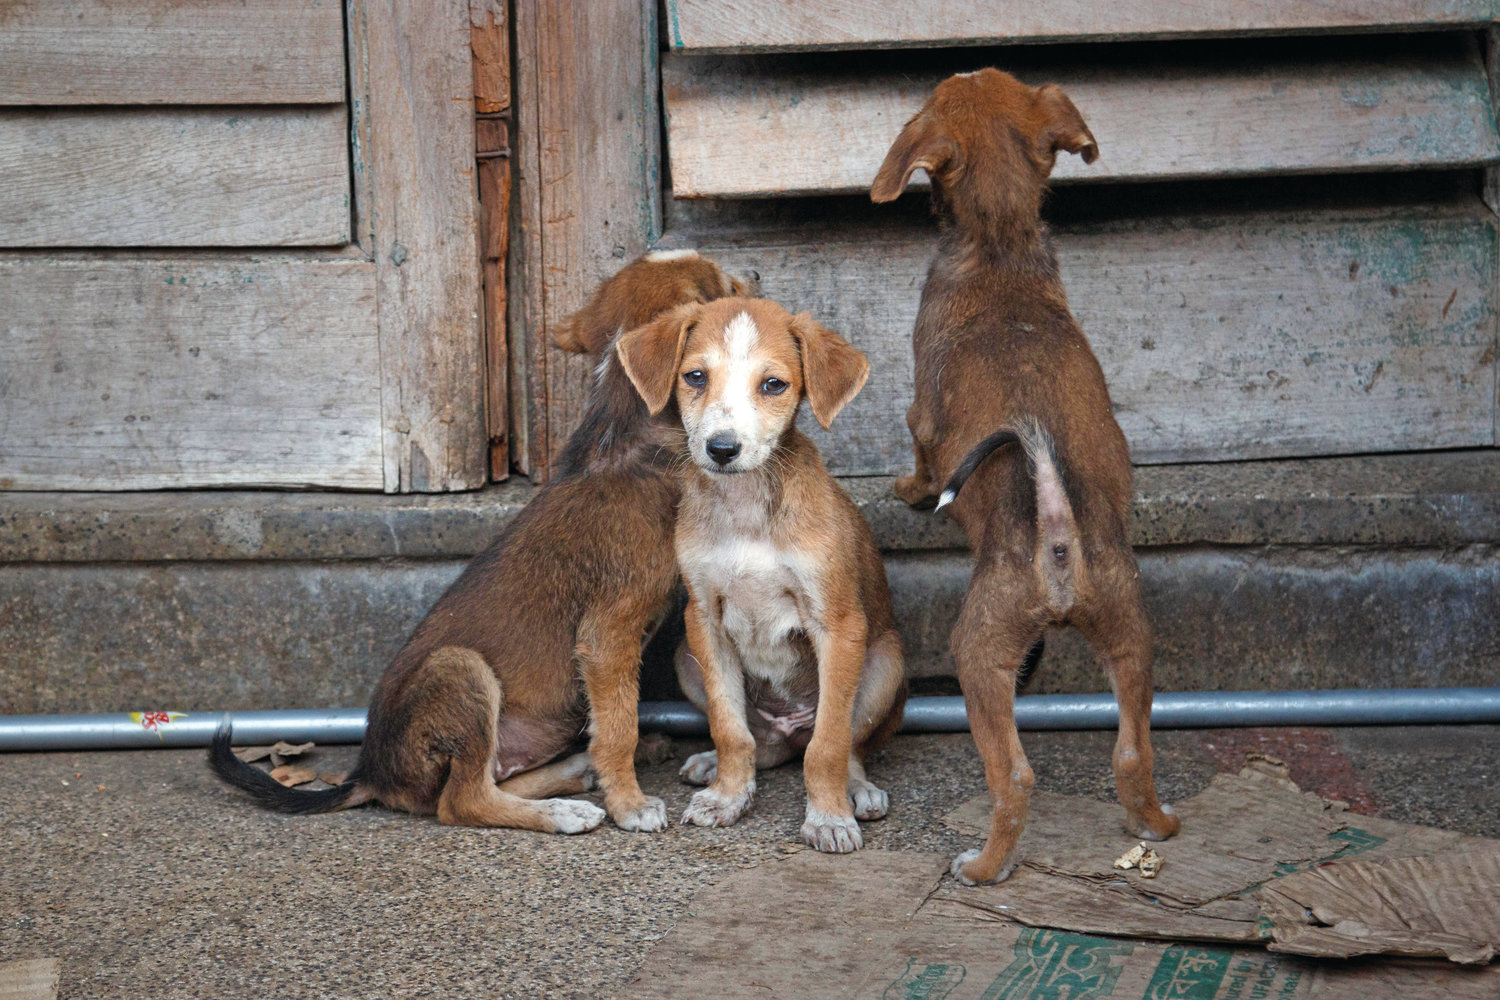 The Indian pariah dog is a self-domesticated pooch native to many cities in India, including Kolkata. The dogs are a constant presence who have learned to interact with local residents.